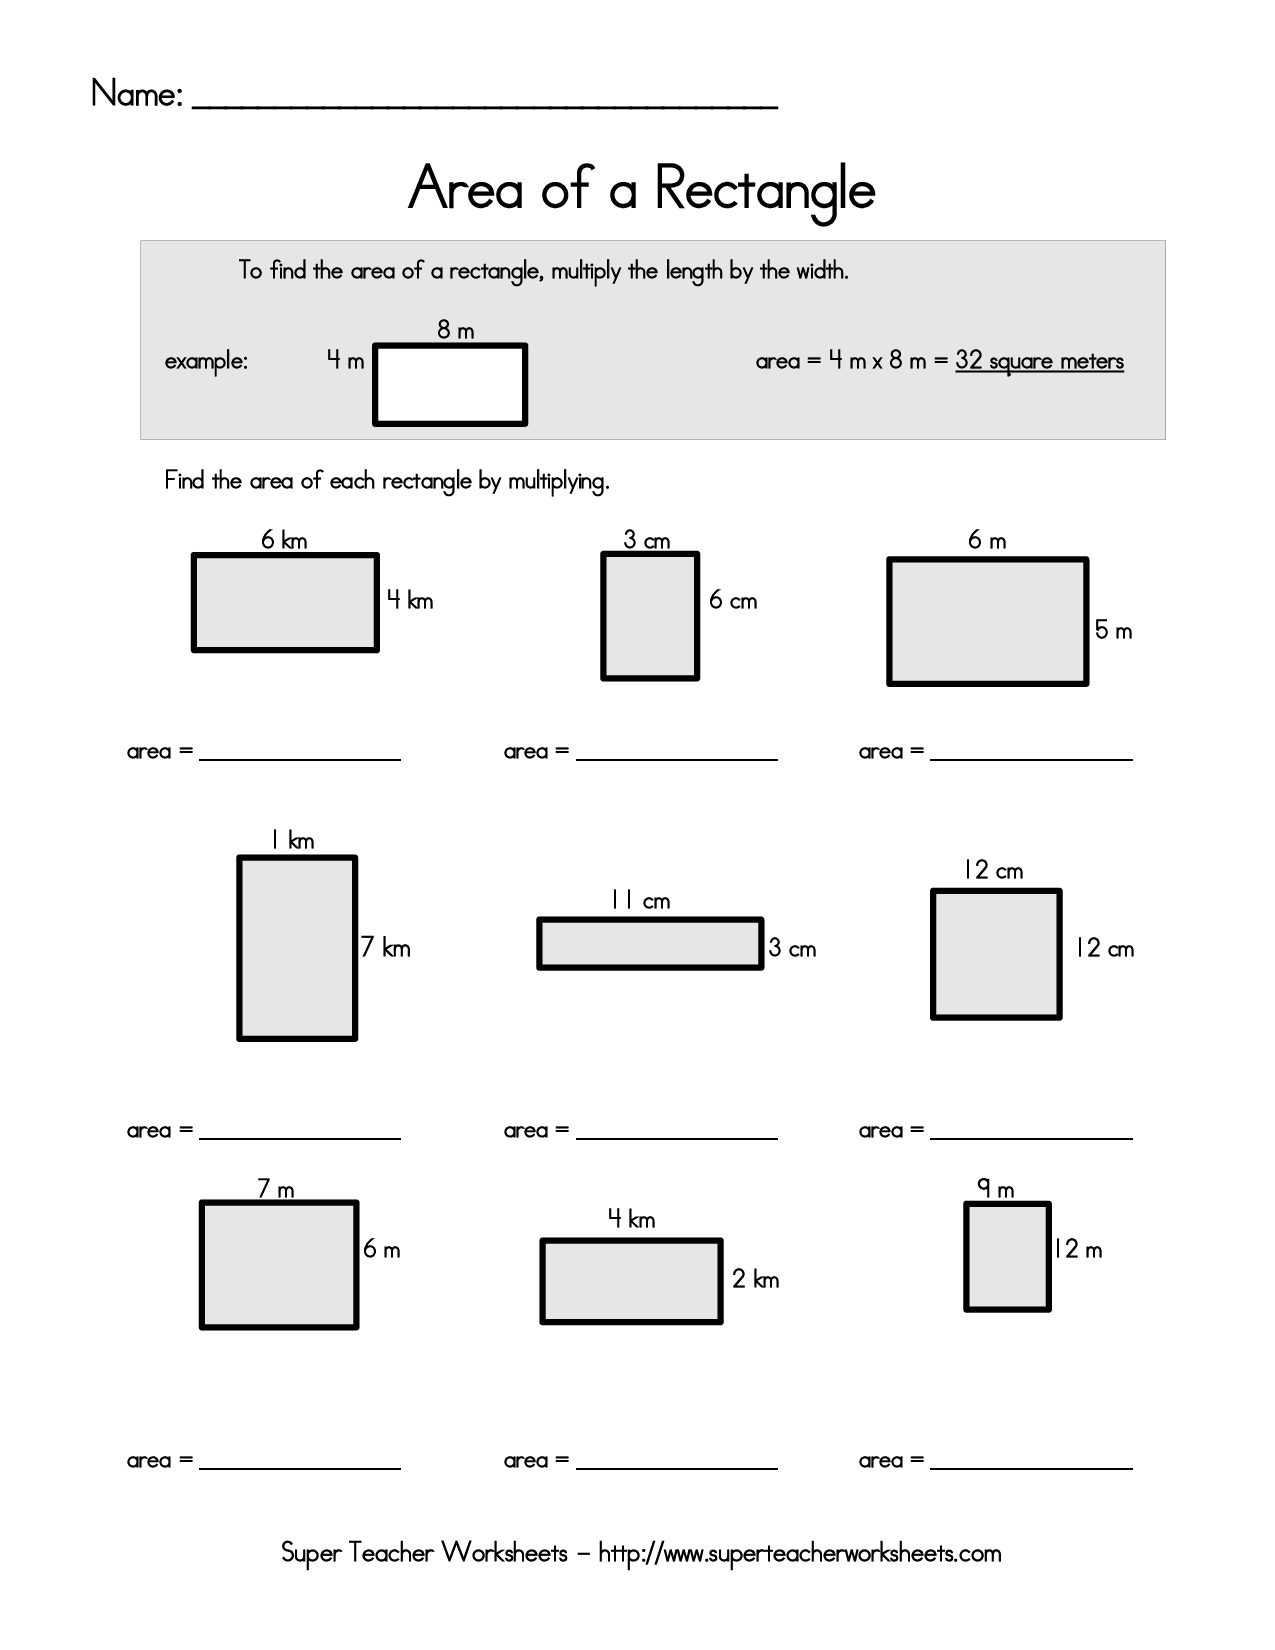 50-area-of-a-rectangle-worksheet-images-sutewo